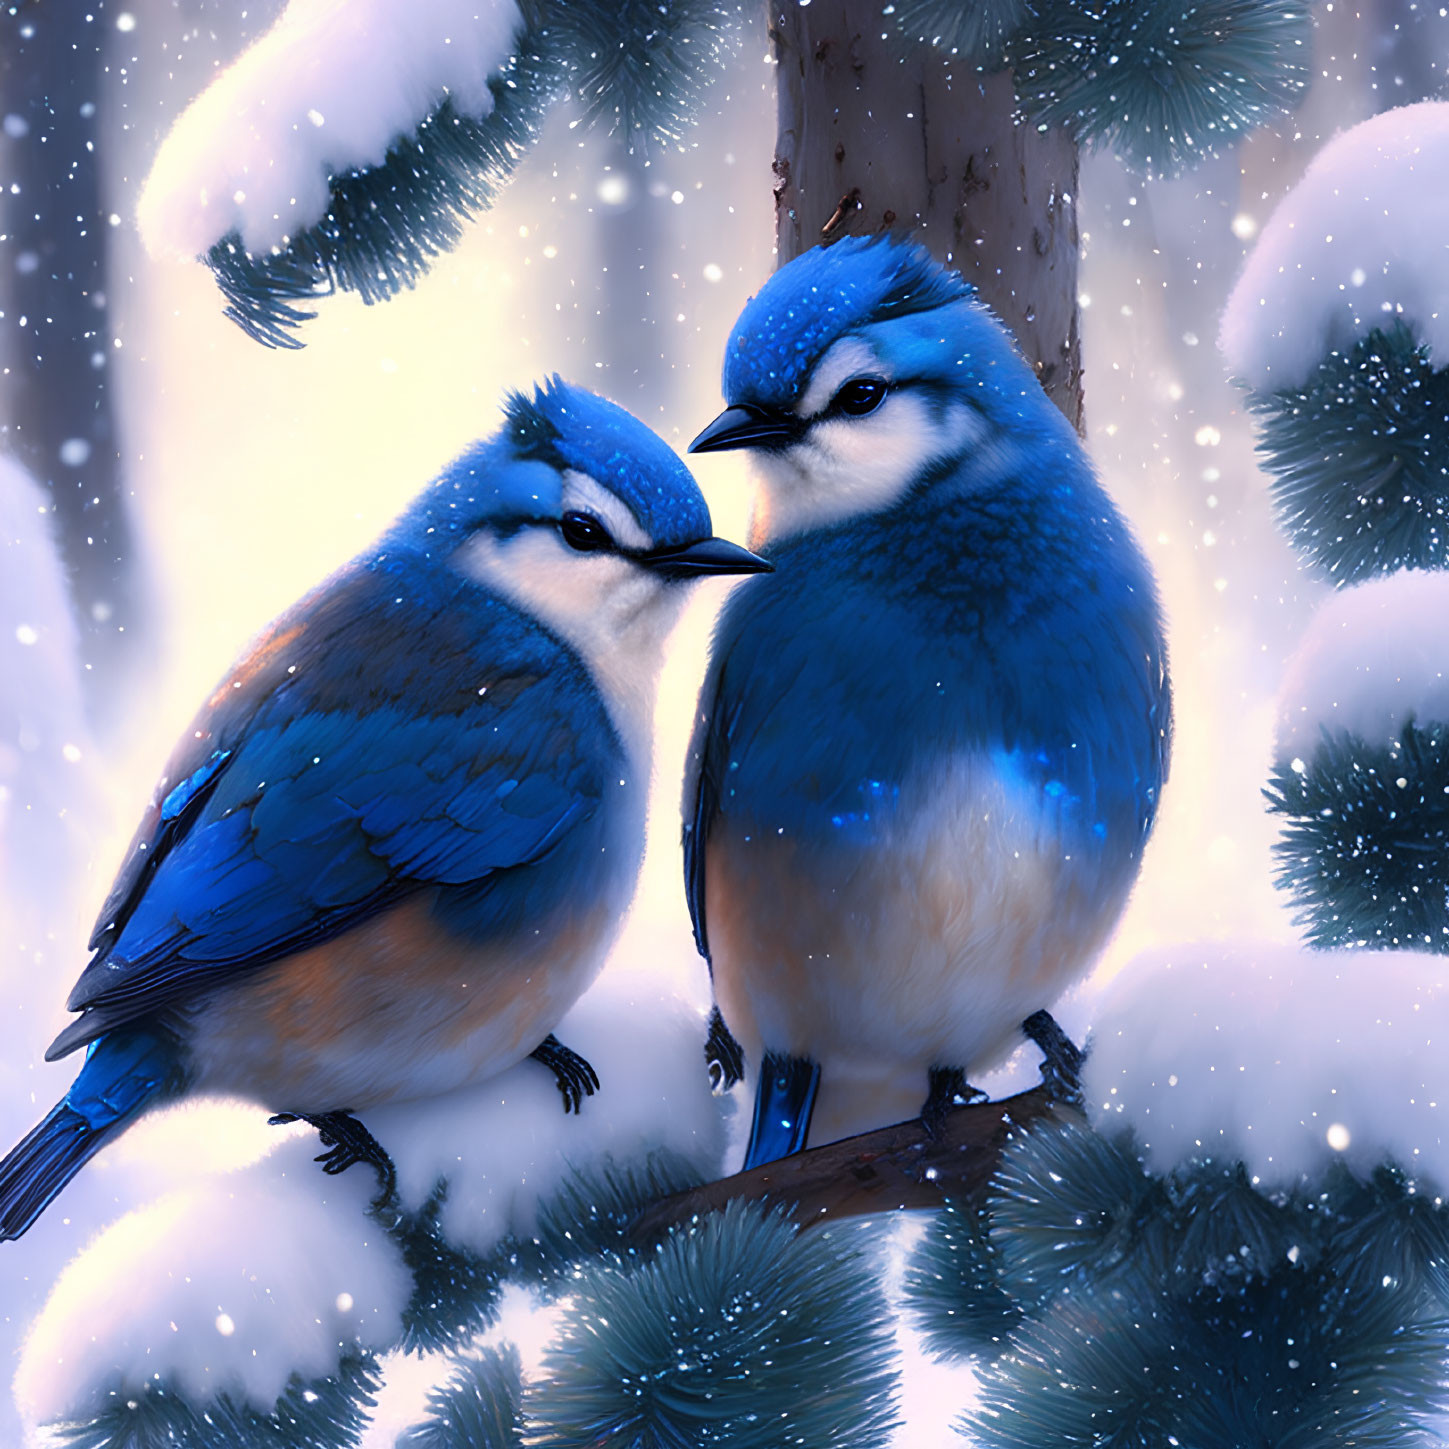 Blue and white birds on snowy branch in soft light.